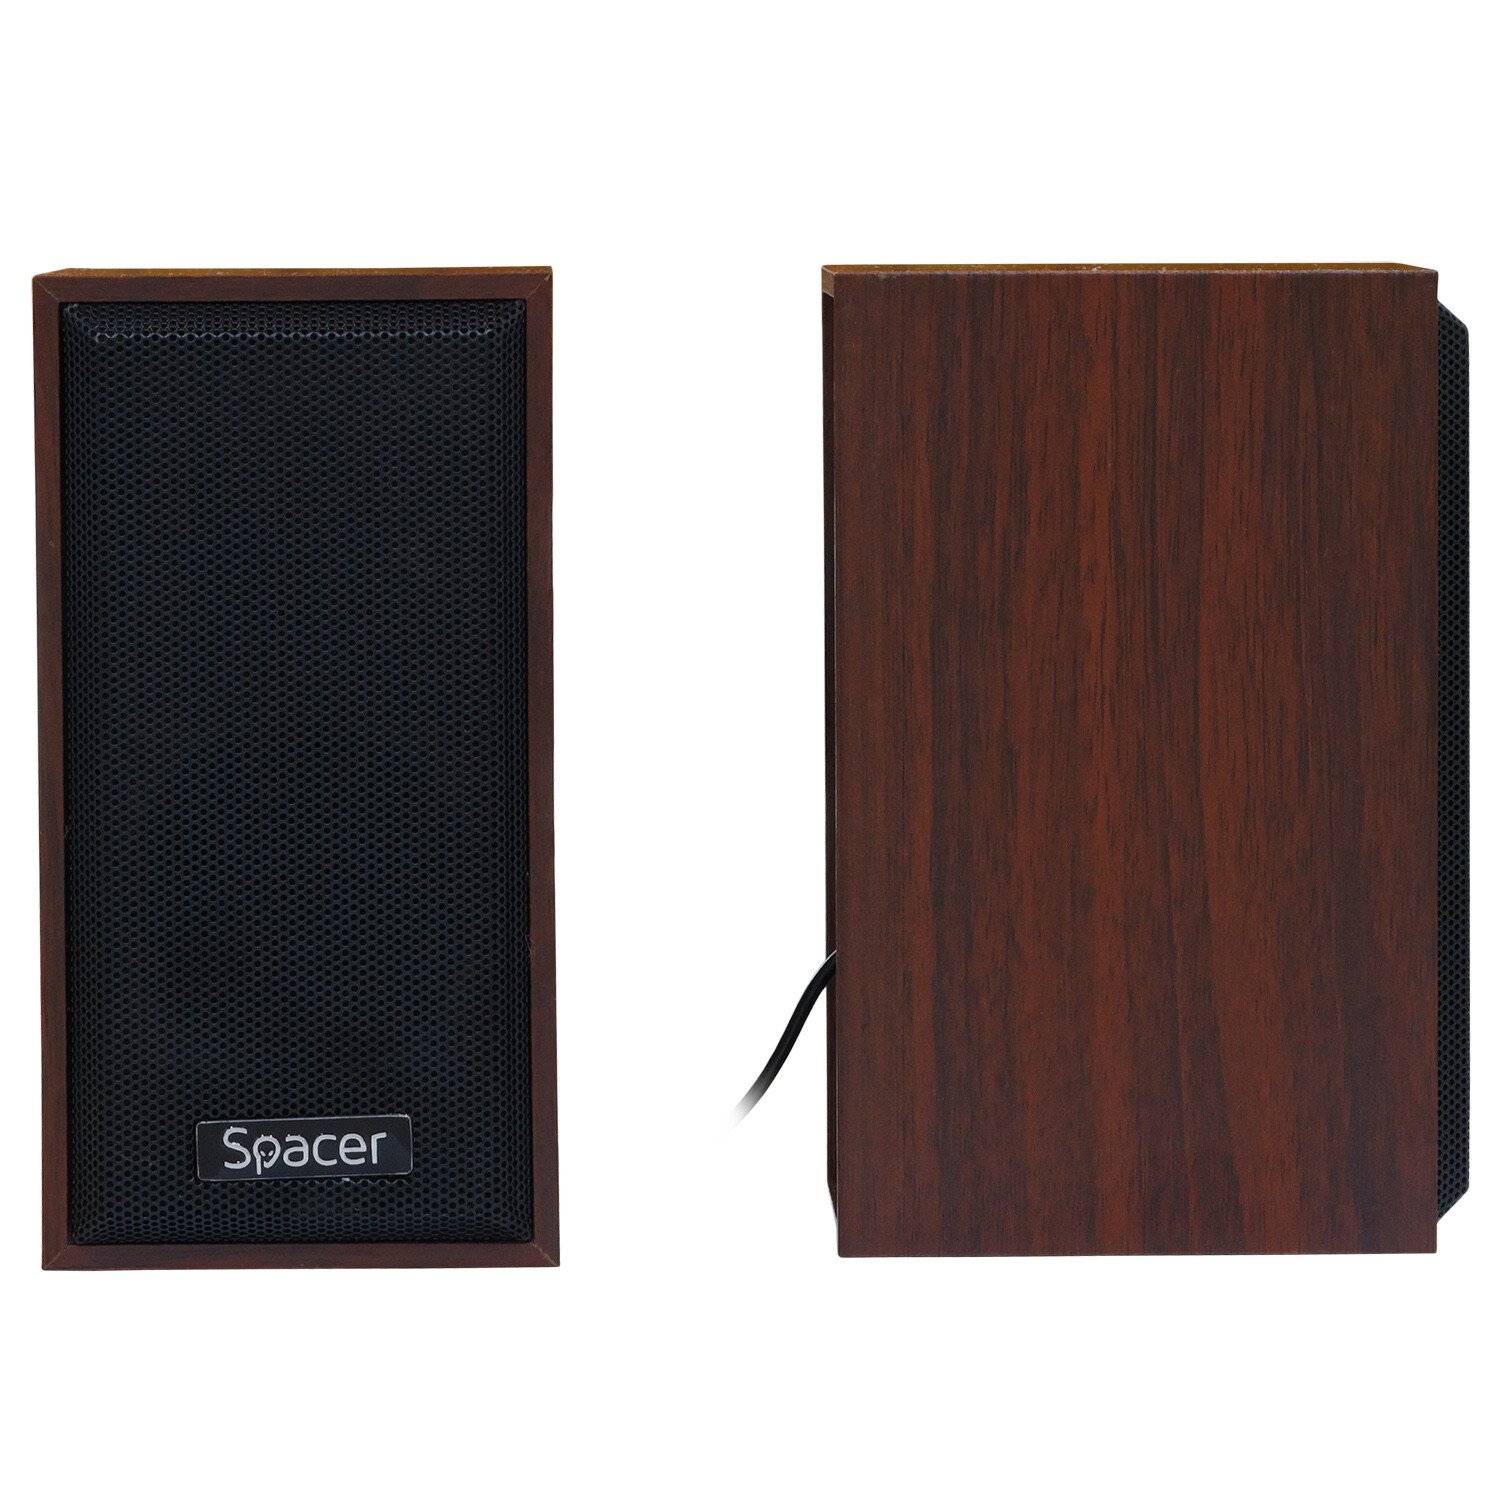 BOXE SPACER 2.0, RMS:  6W (2 x 3W), control volum, USB power, wooden, "SPSK-201-WD" (include TV 0.8lei) thumb